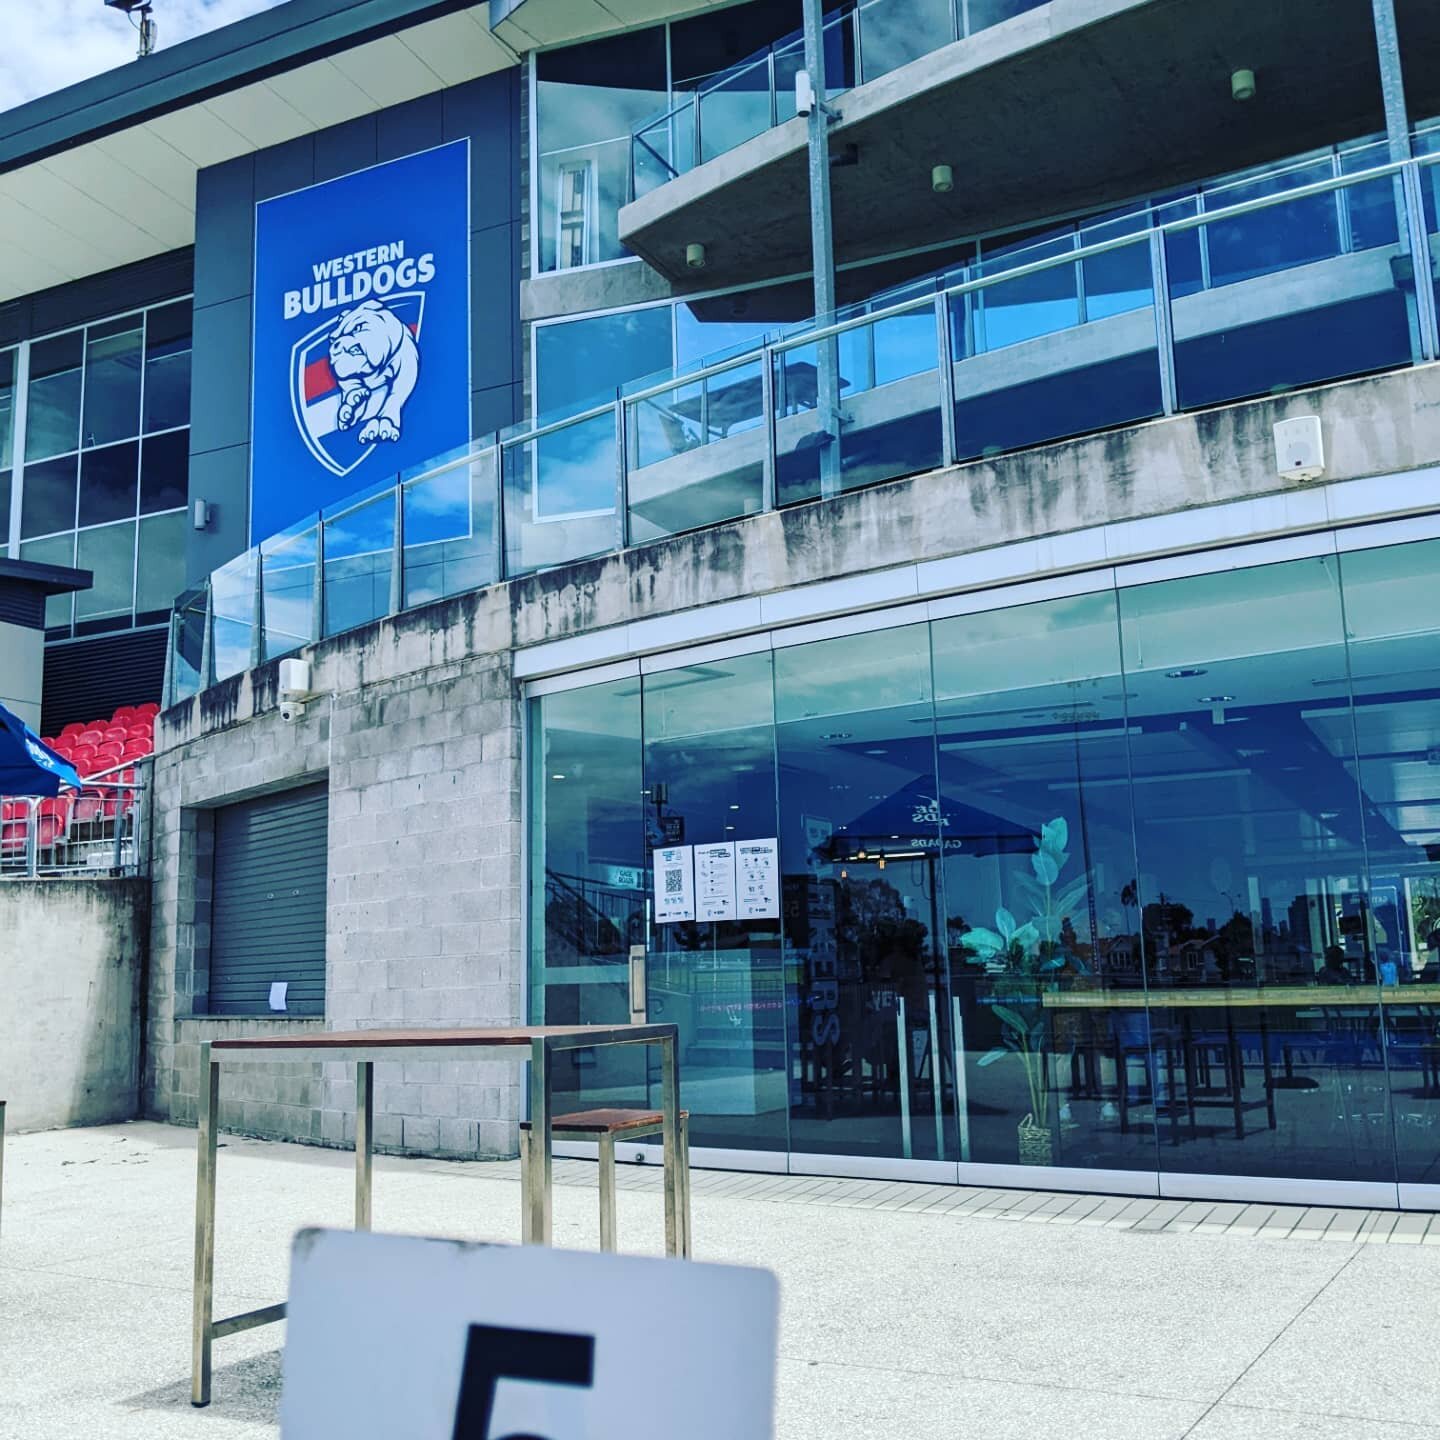 When is a footy change room, not a footy change room? When it's a conservation workspace, of course!!
We have spent the last couple of days hanging at the Western Bulldogs, taking over one of the AFLW changerooms, working to de-frame, and remove from